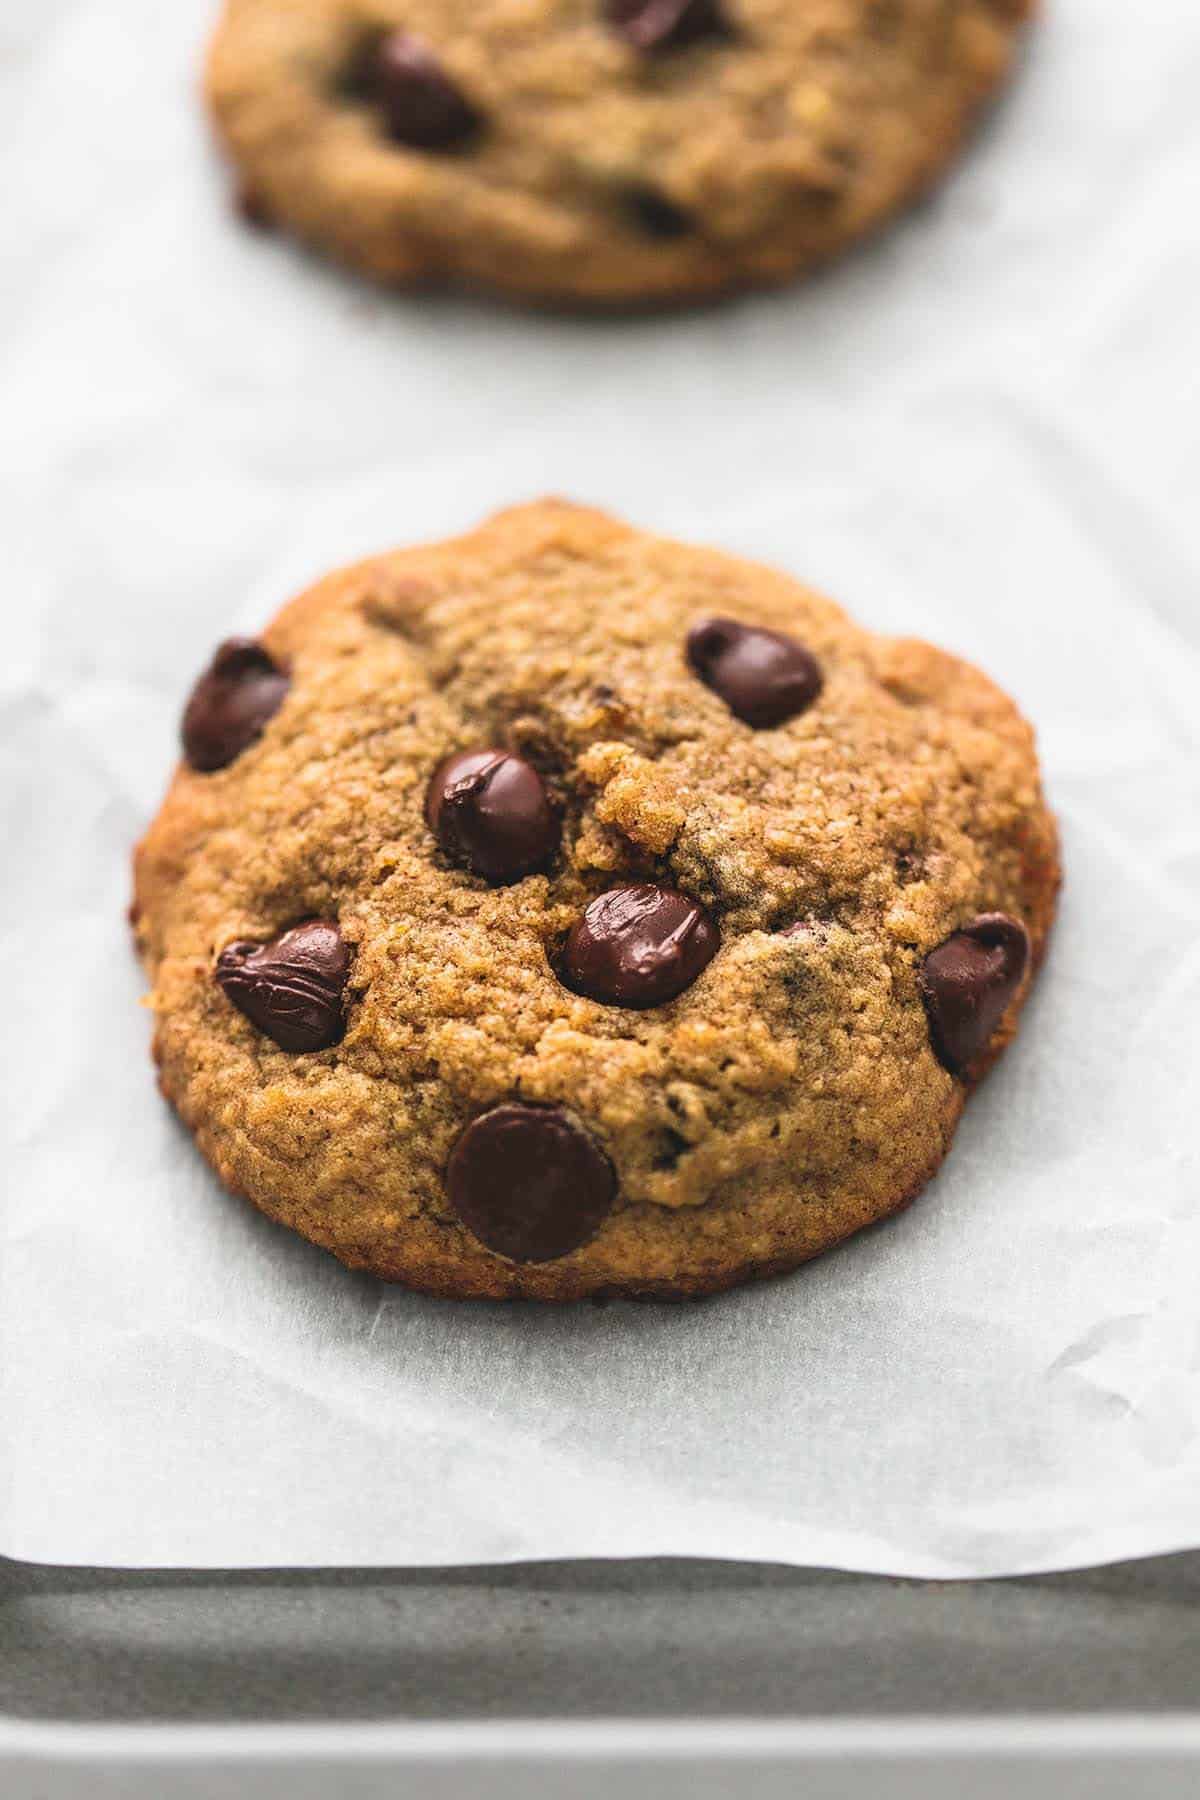 a banana chocolate chip cookie with another cookie in the background.